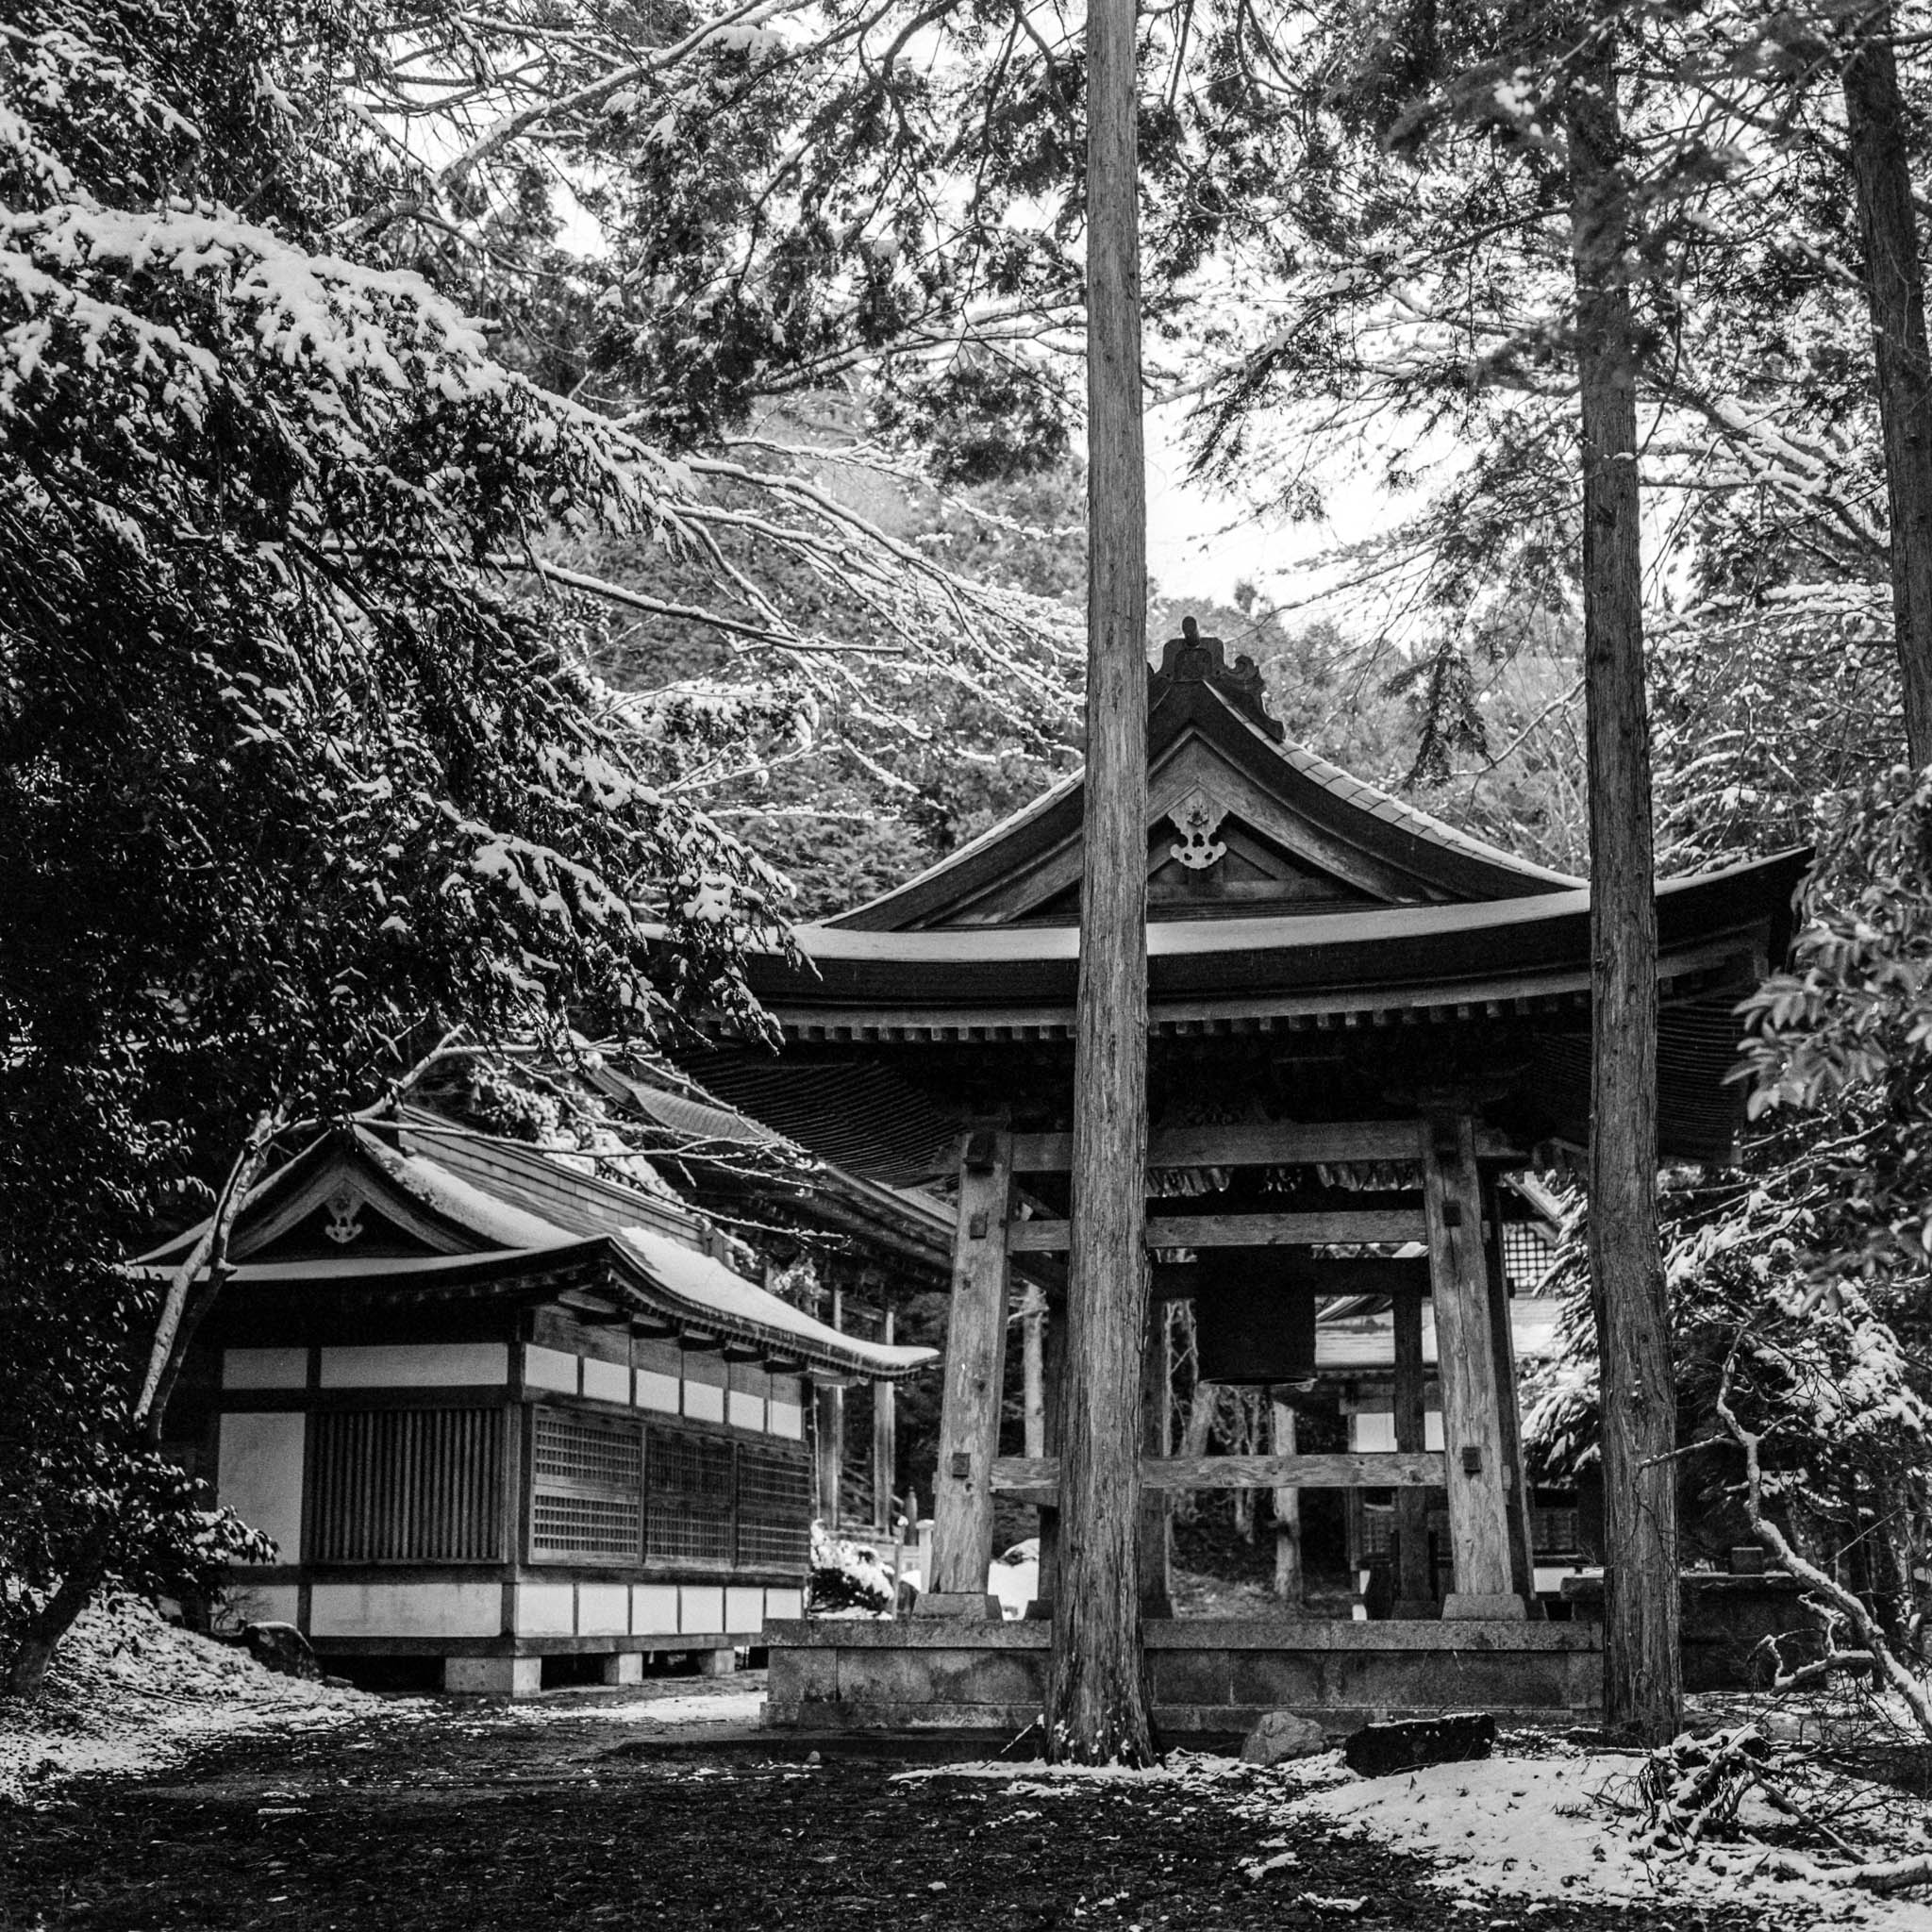 Winter view of a secluded Japanese temple amidst snowy forest in black and white photograph.